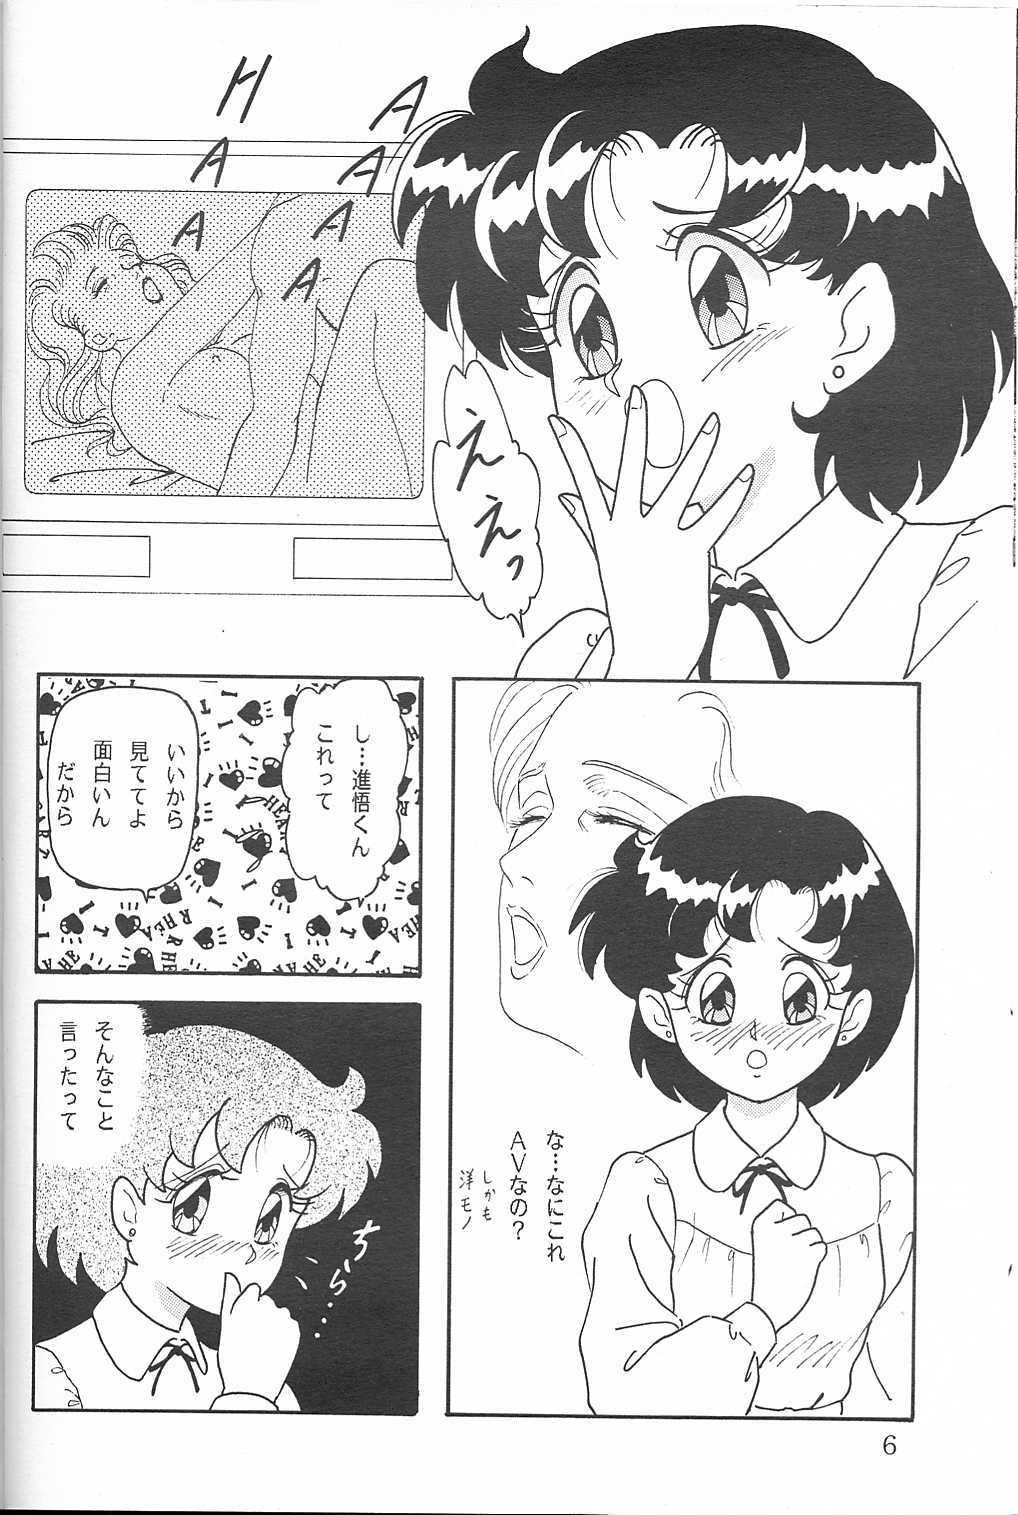 Perfect Ass (C45) [Chandora & Lunch Box (Makunouchi Isami)] Lunch Box 5 - Ami-chan to Issho (Sailor Moon) - Sailor moon Leite - Page 5